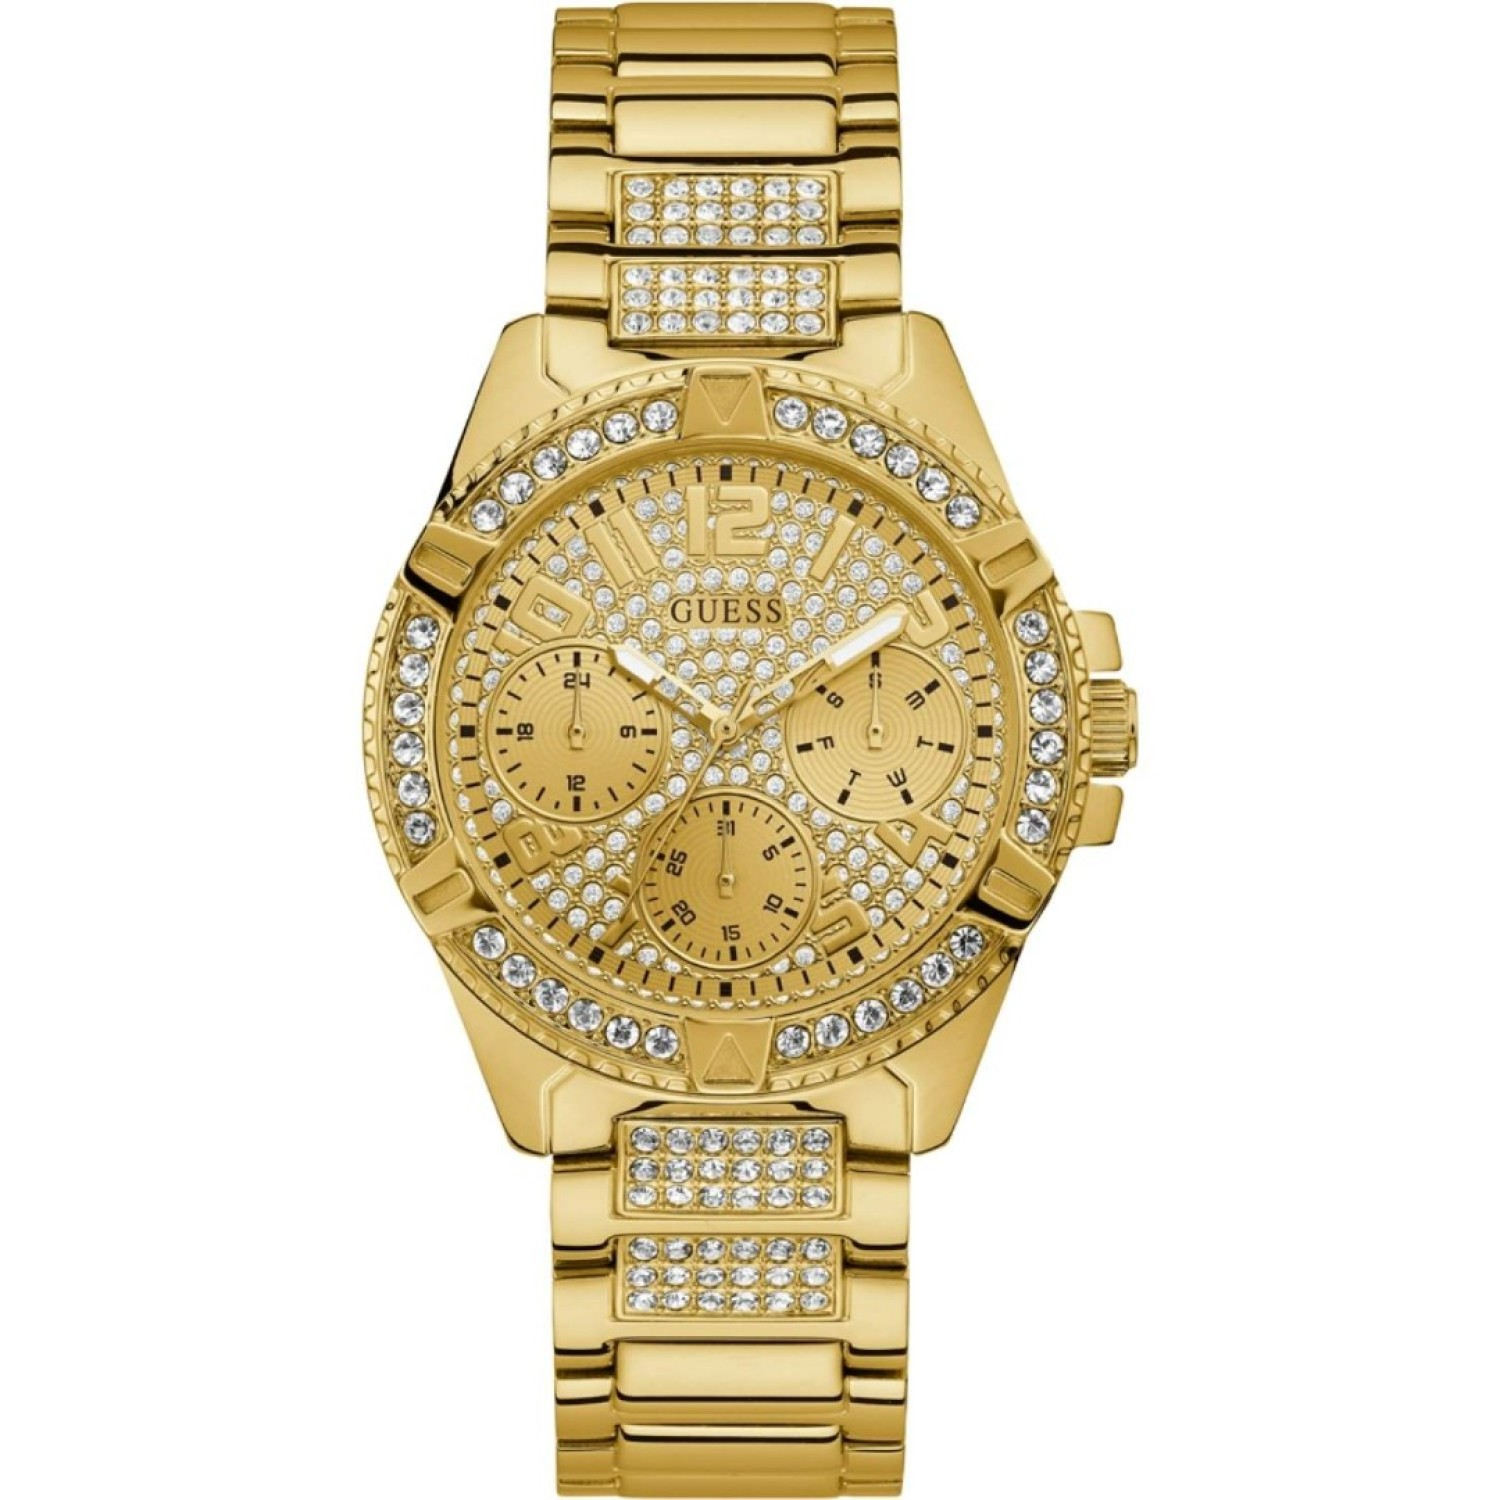 W1156L2 GUESS Ladies Frontier Gold Watch W1156L2